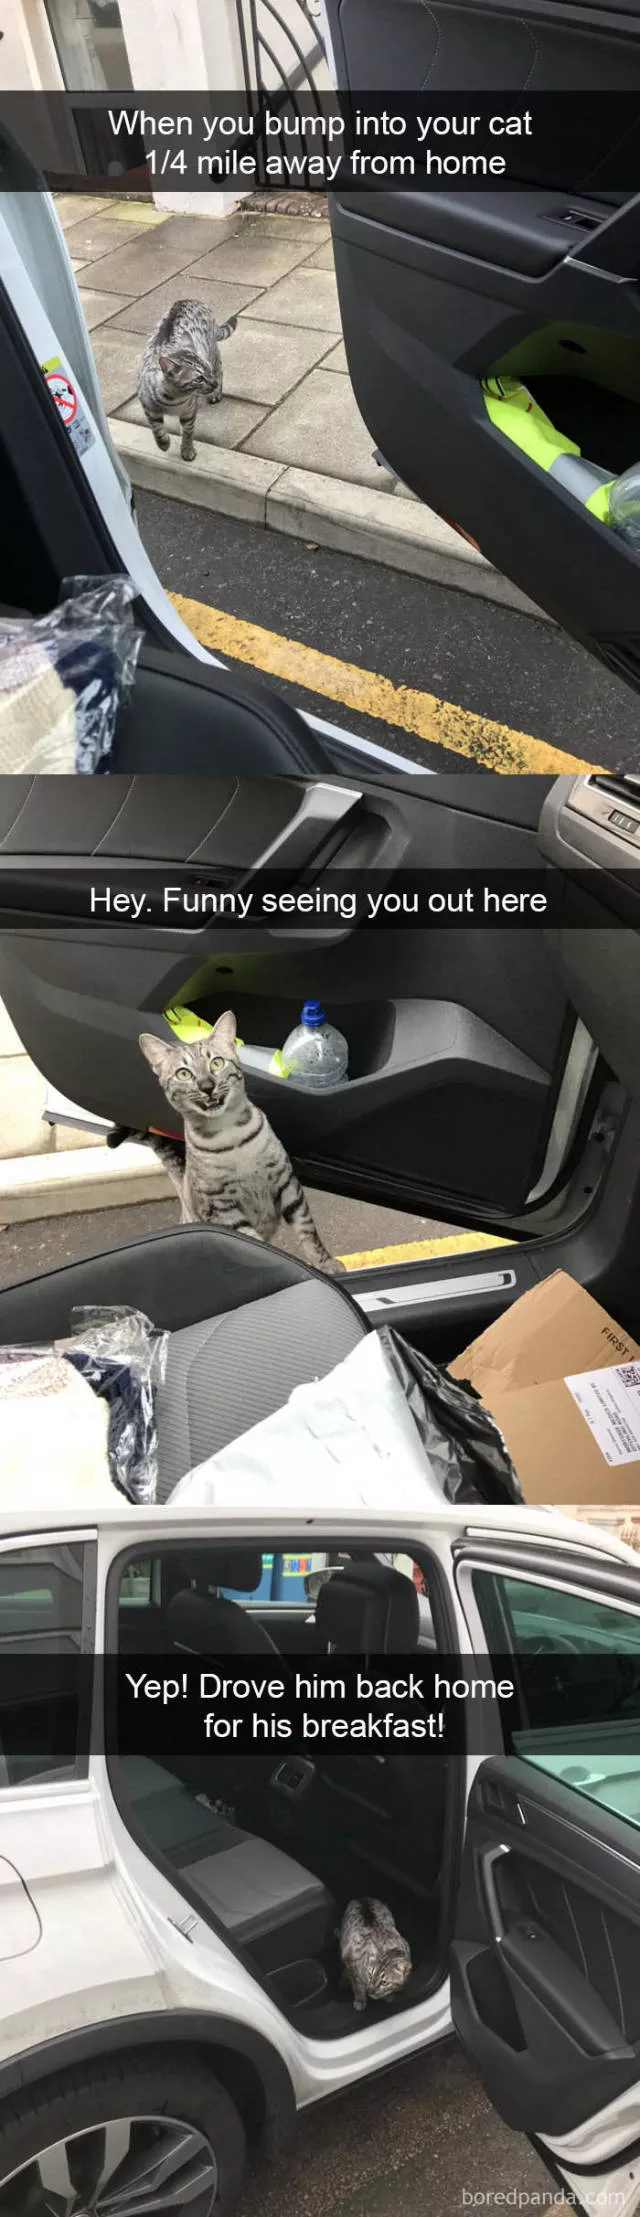 Snapchat for cats - #37 